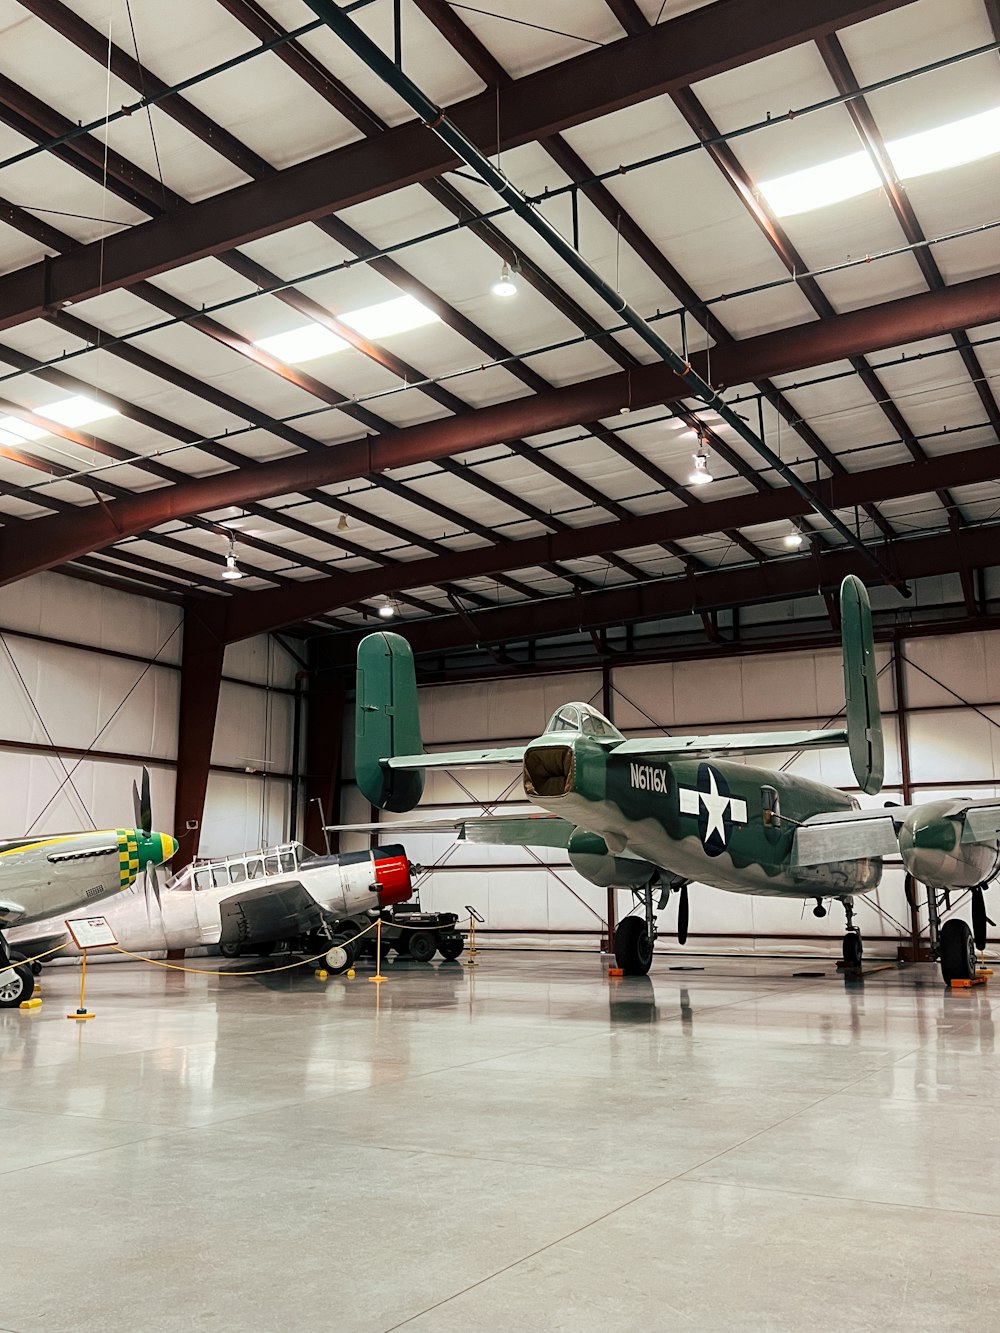 two airplanes are parked in a hanger at an airport